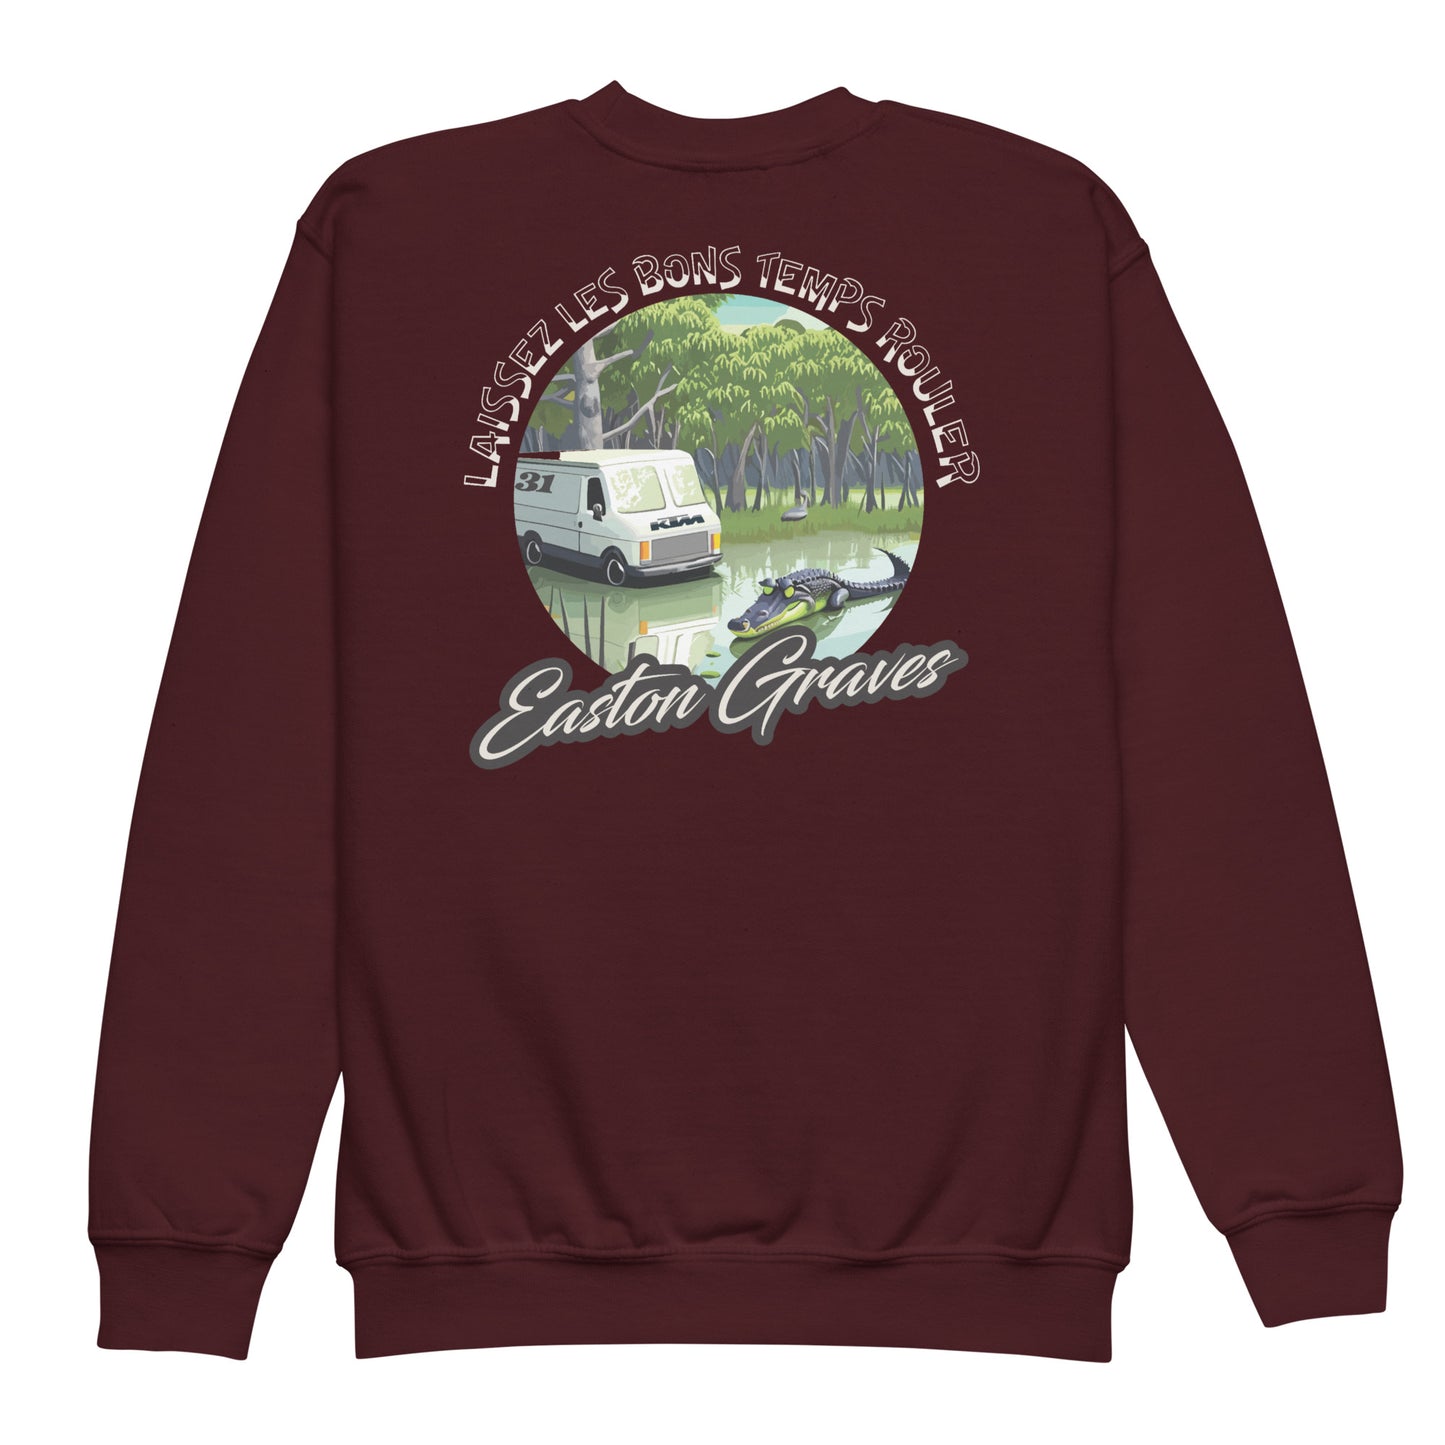 Easton Graves Let the Good Times Roll YOUTH Sweatshirt